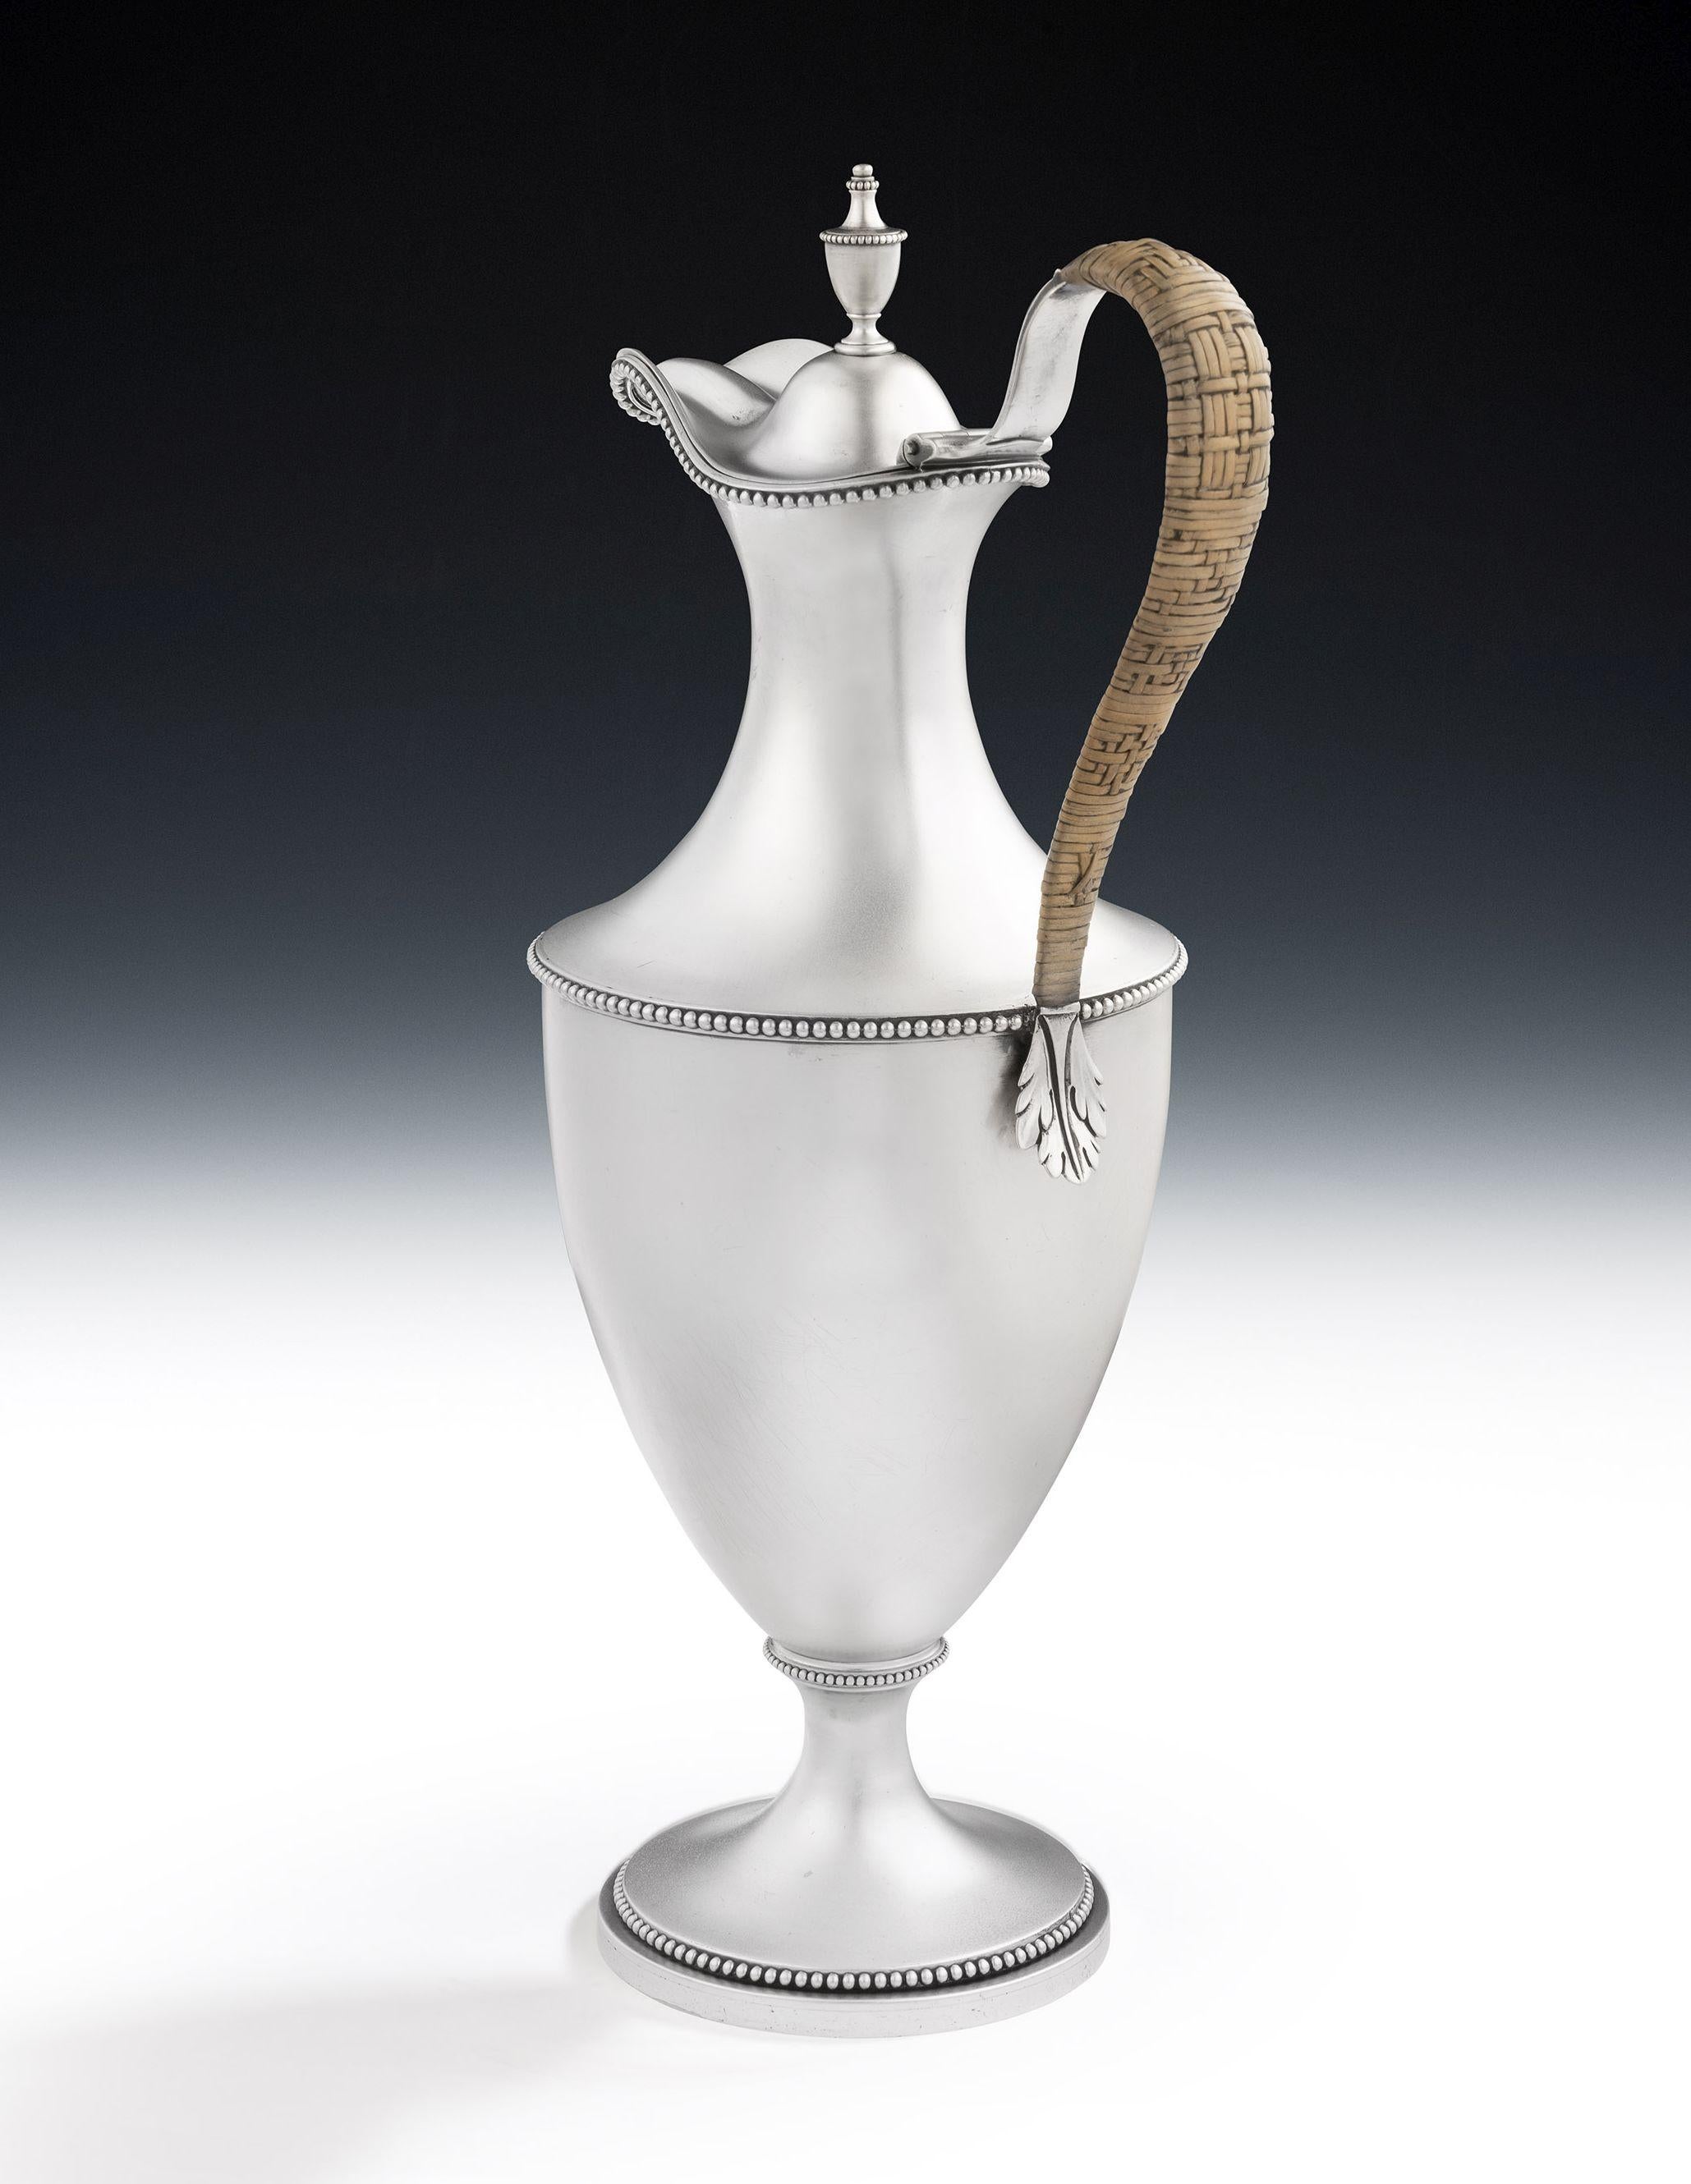 A very fine George III Water/Wine Ewer made in London in 1778 by Makepeace & Carter

The Ewer is of the Neo Classical form and stands on a domed circular foot.  The main body is vase shaped and is decorated with various beaded bands, as is the rim. 